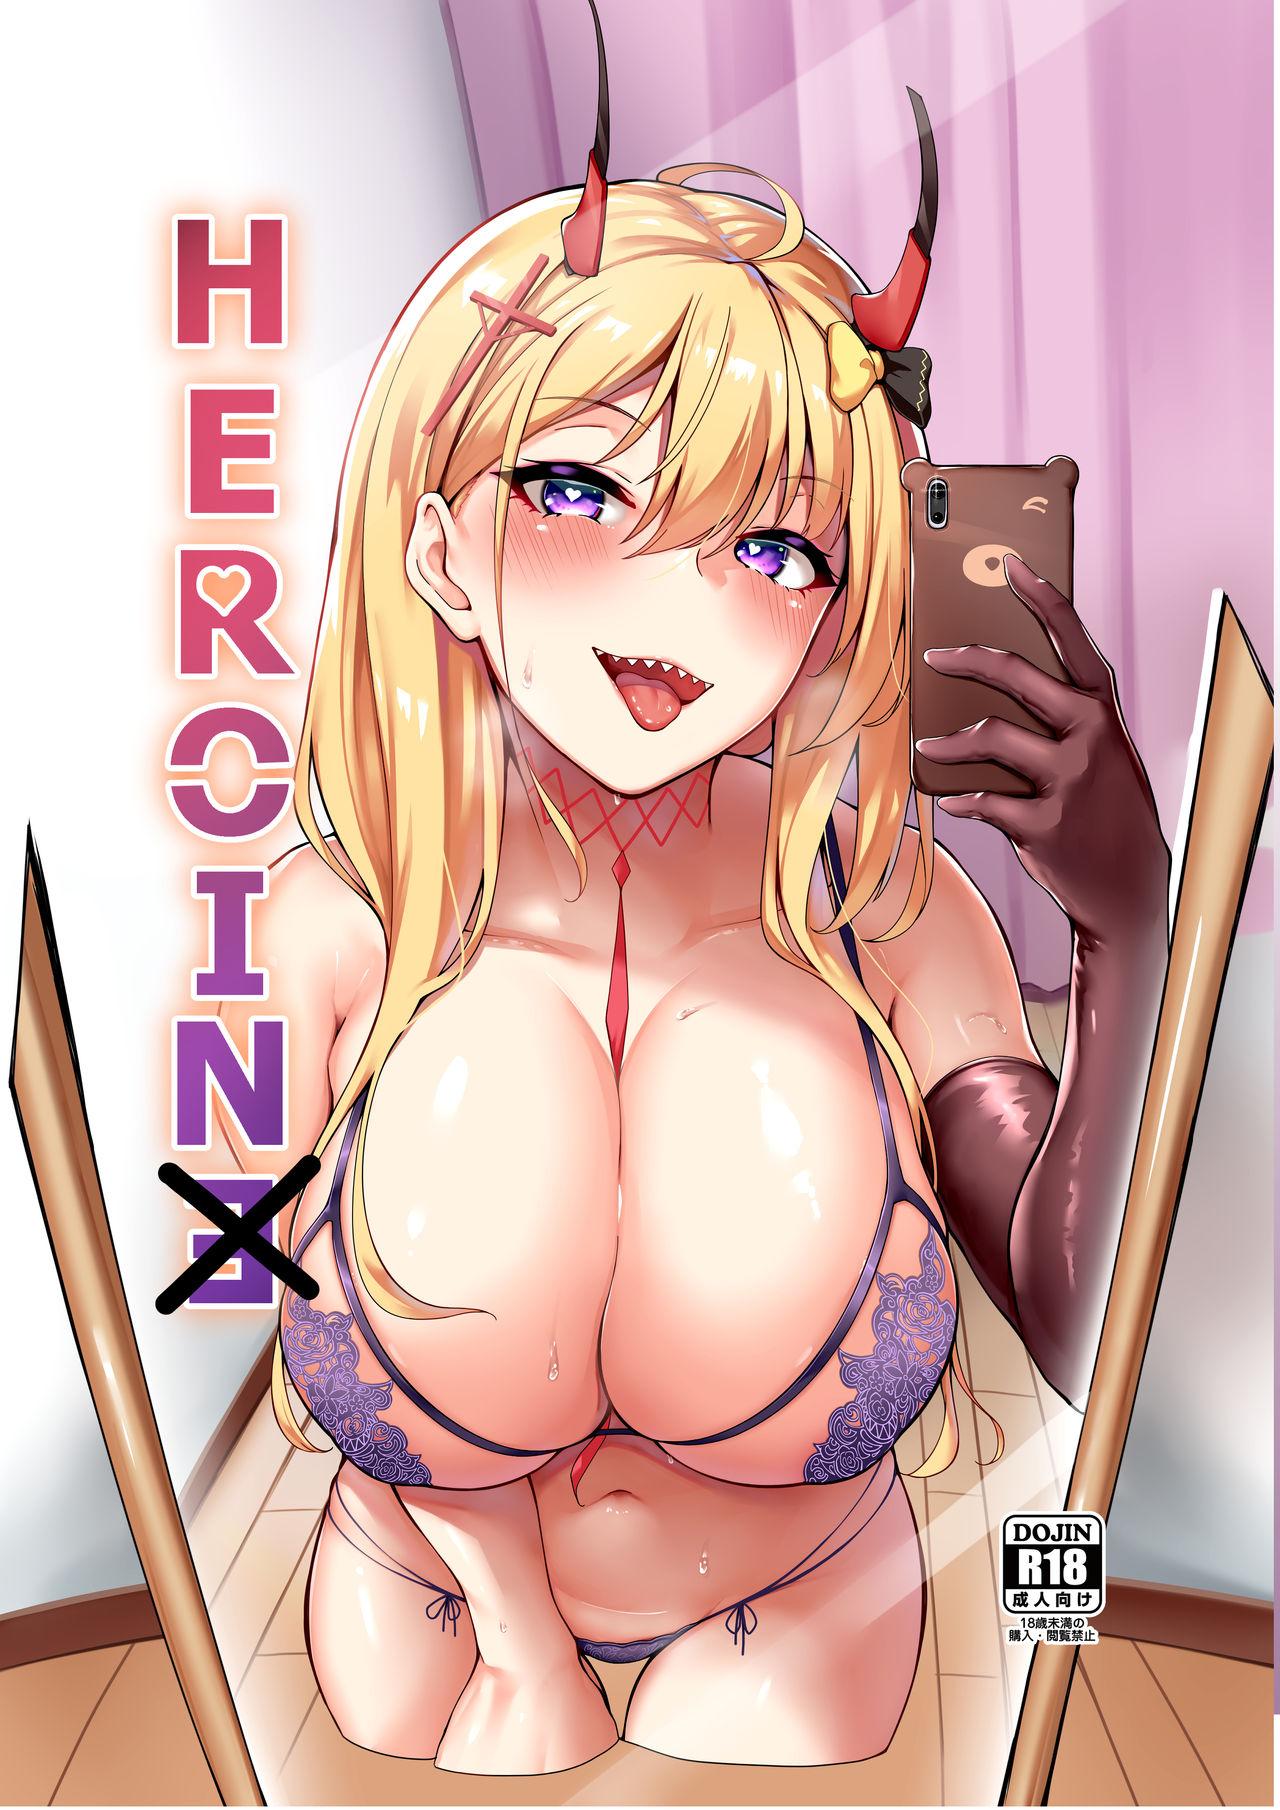 Old Vs Young HEROINE - Azur lane Tittyfuck - Page 2